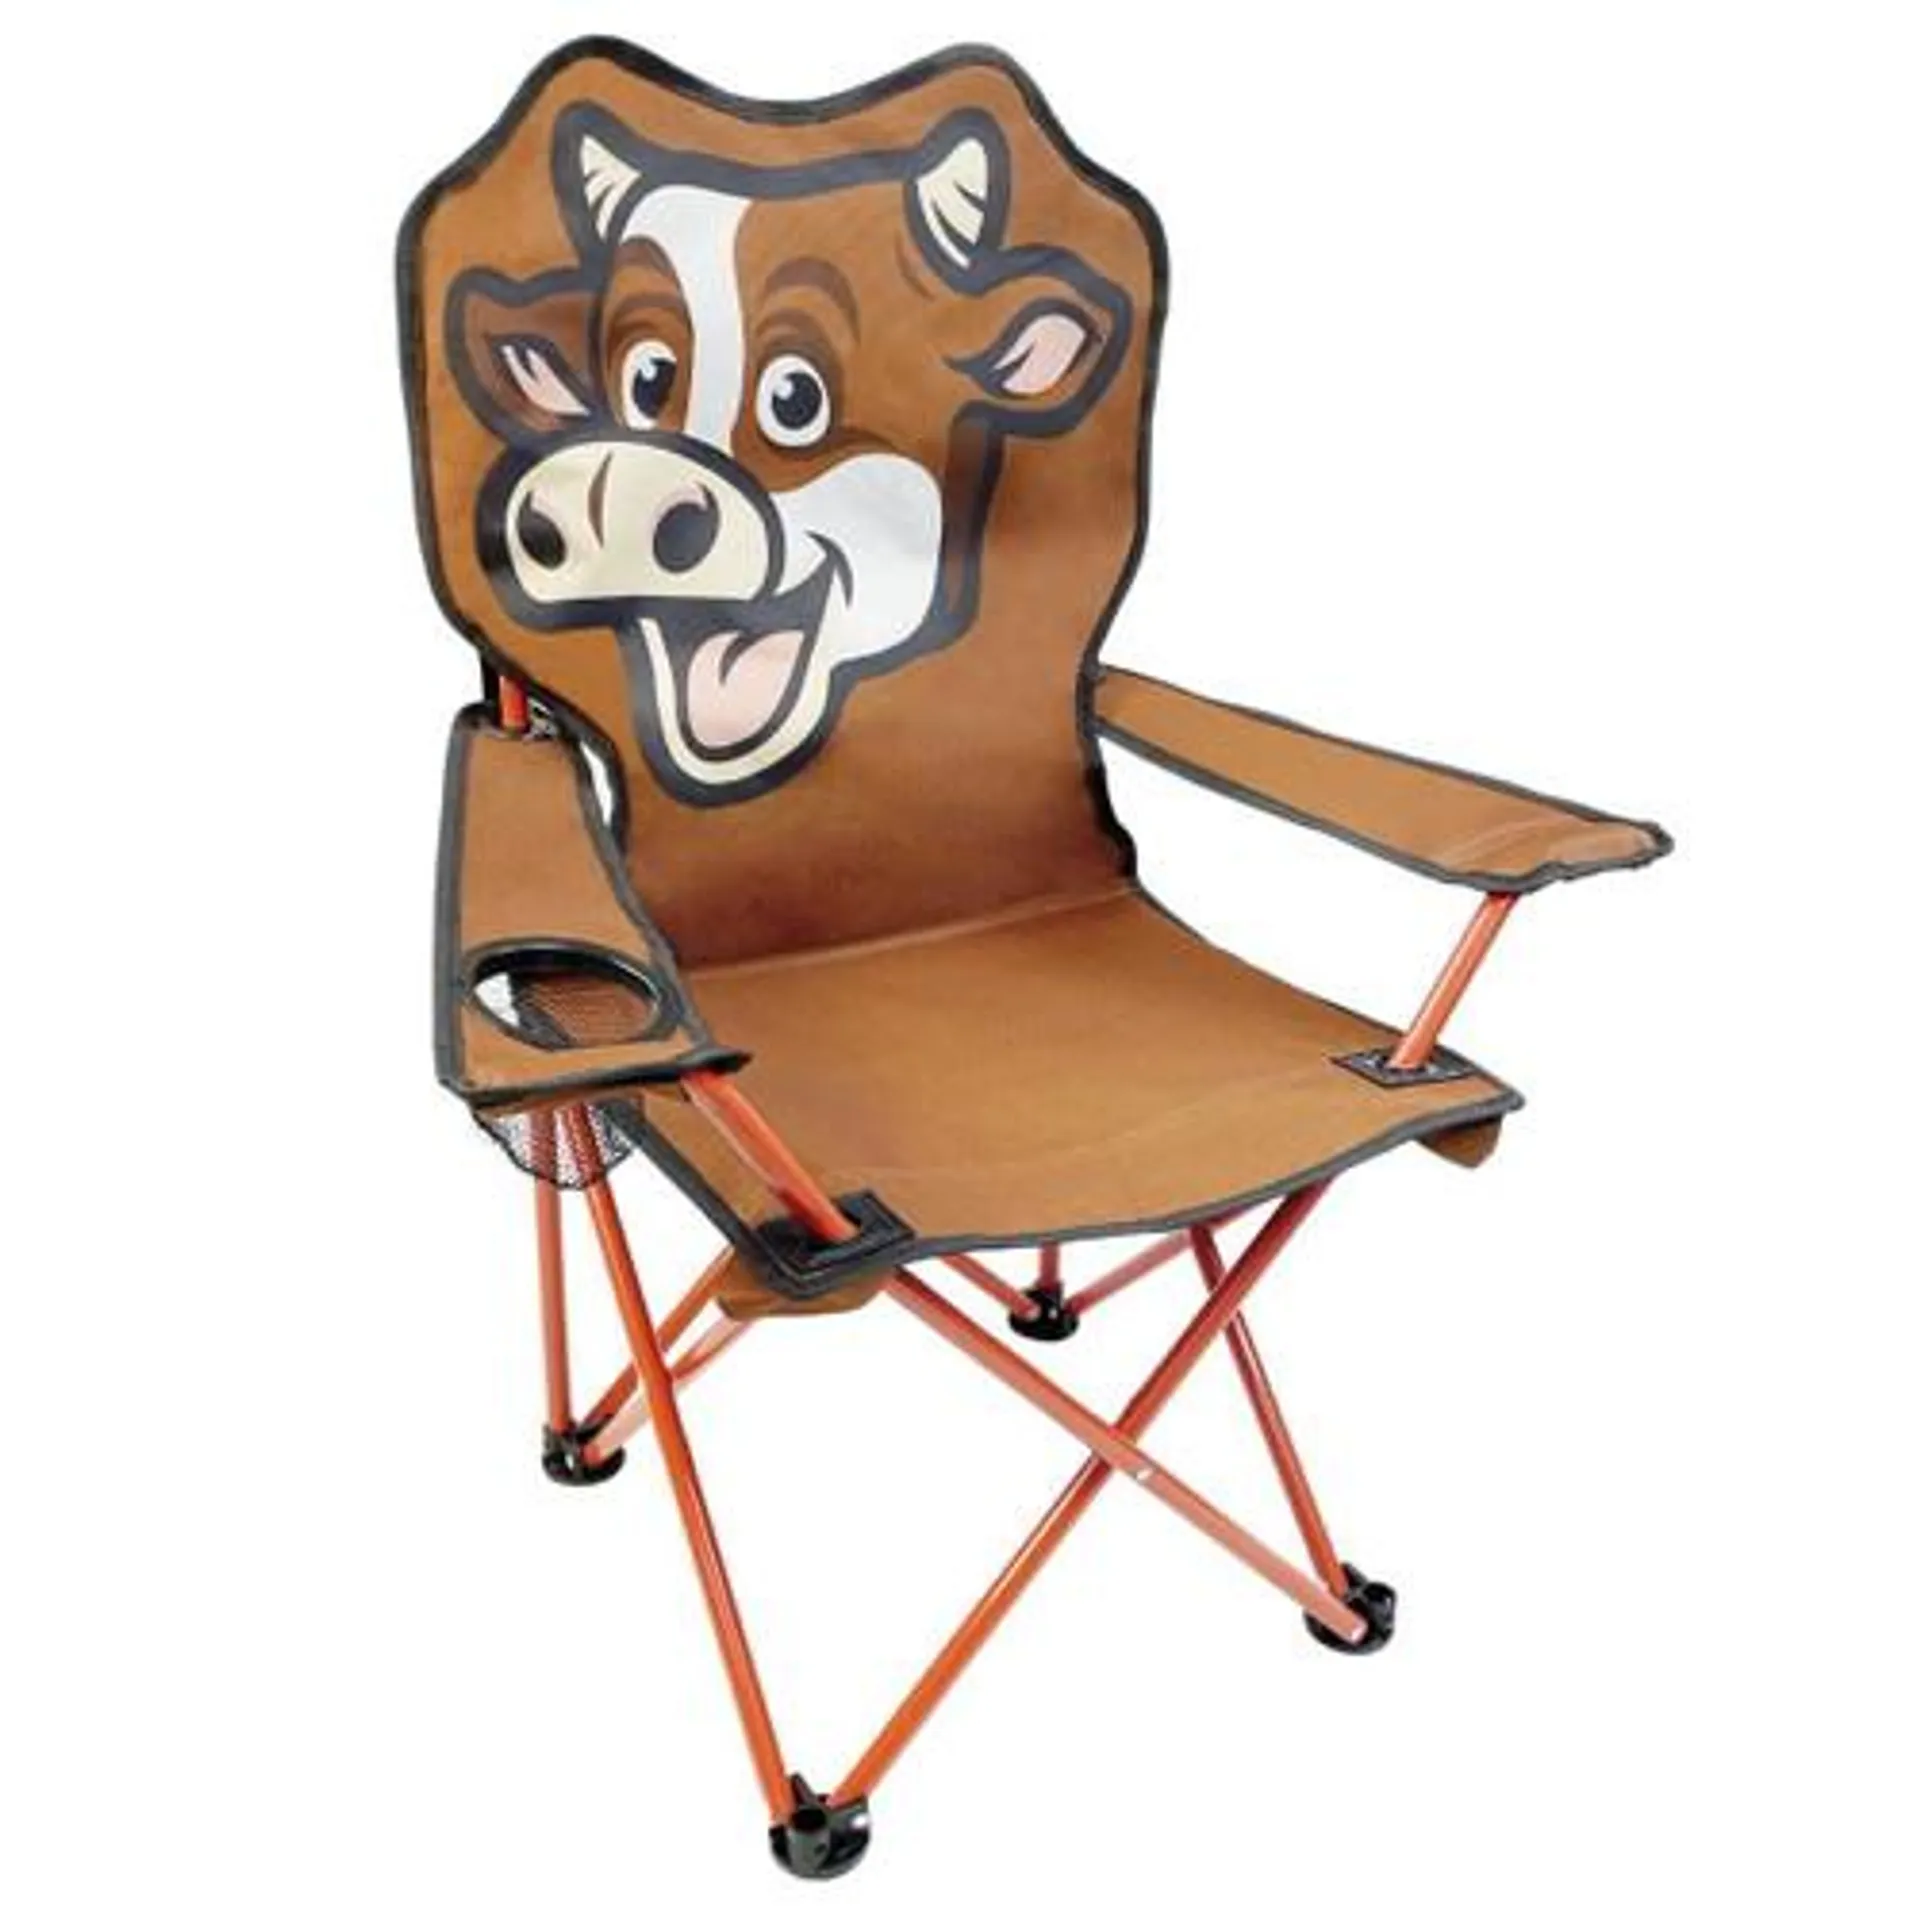 Traditions Bobby Beef Jr. Quad Chair